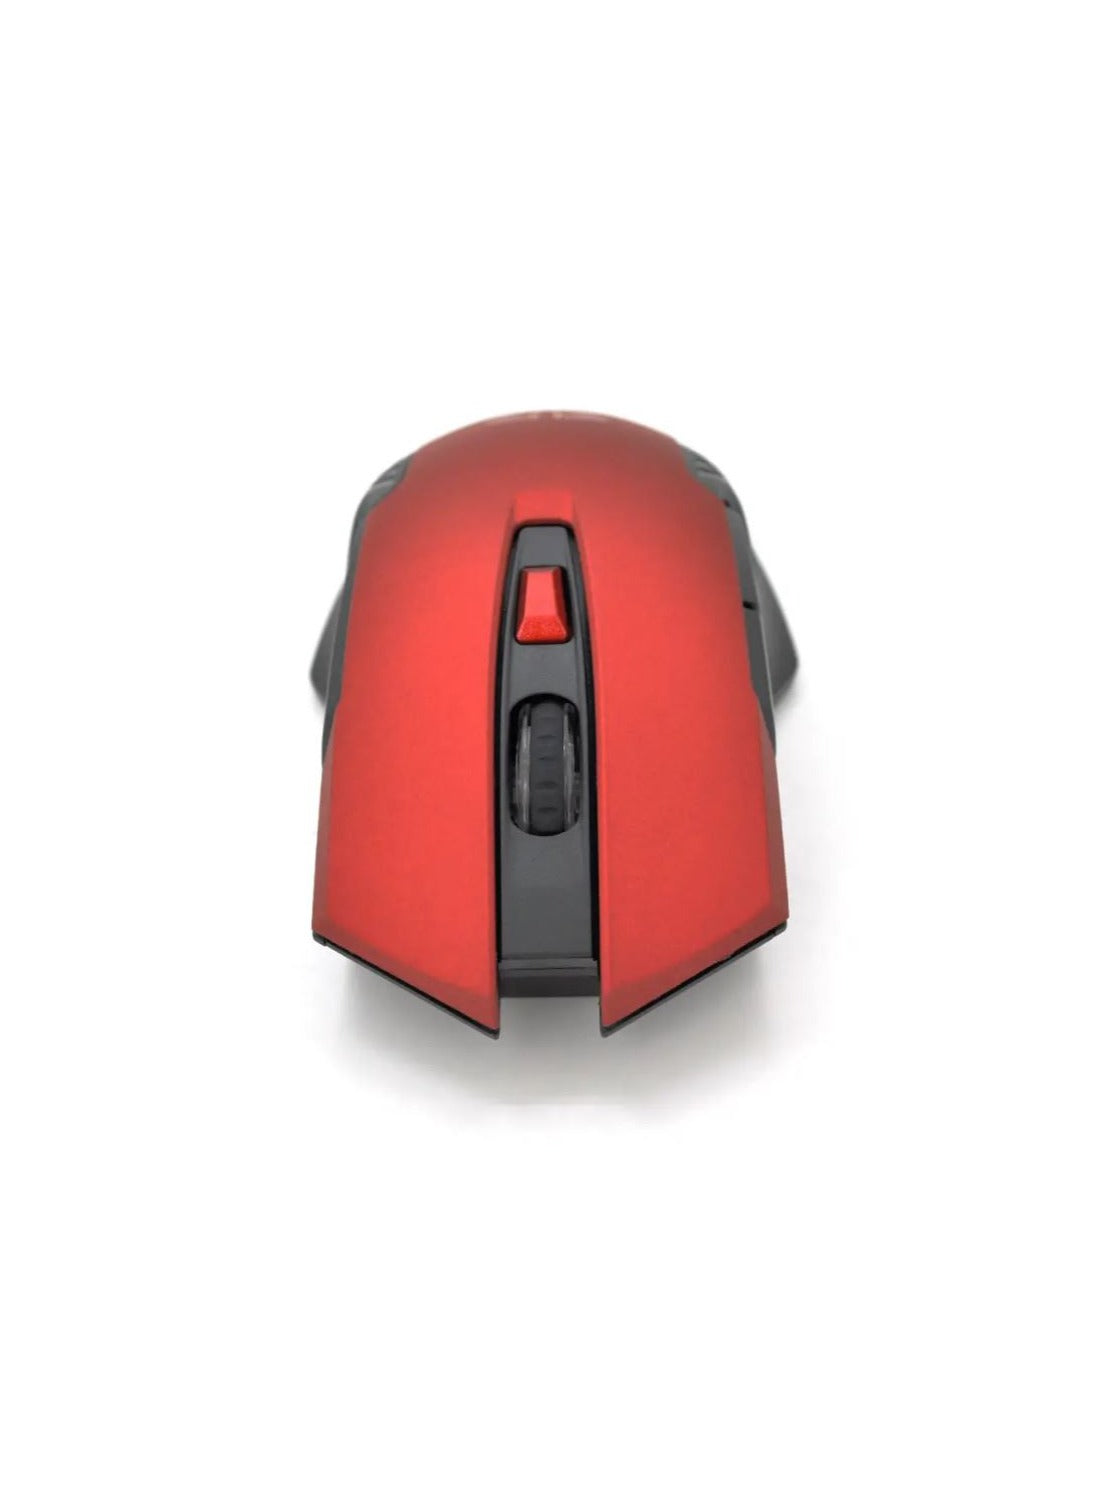 FANTECH Red WG10 Mouse Wireless (2.4GHZ) Gaming Mouse With USB Receiver | Optical Sensor 2,000 DPI - PC/LAPTOP/MAC